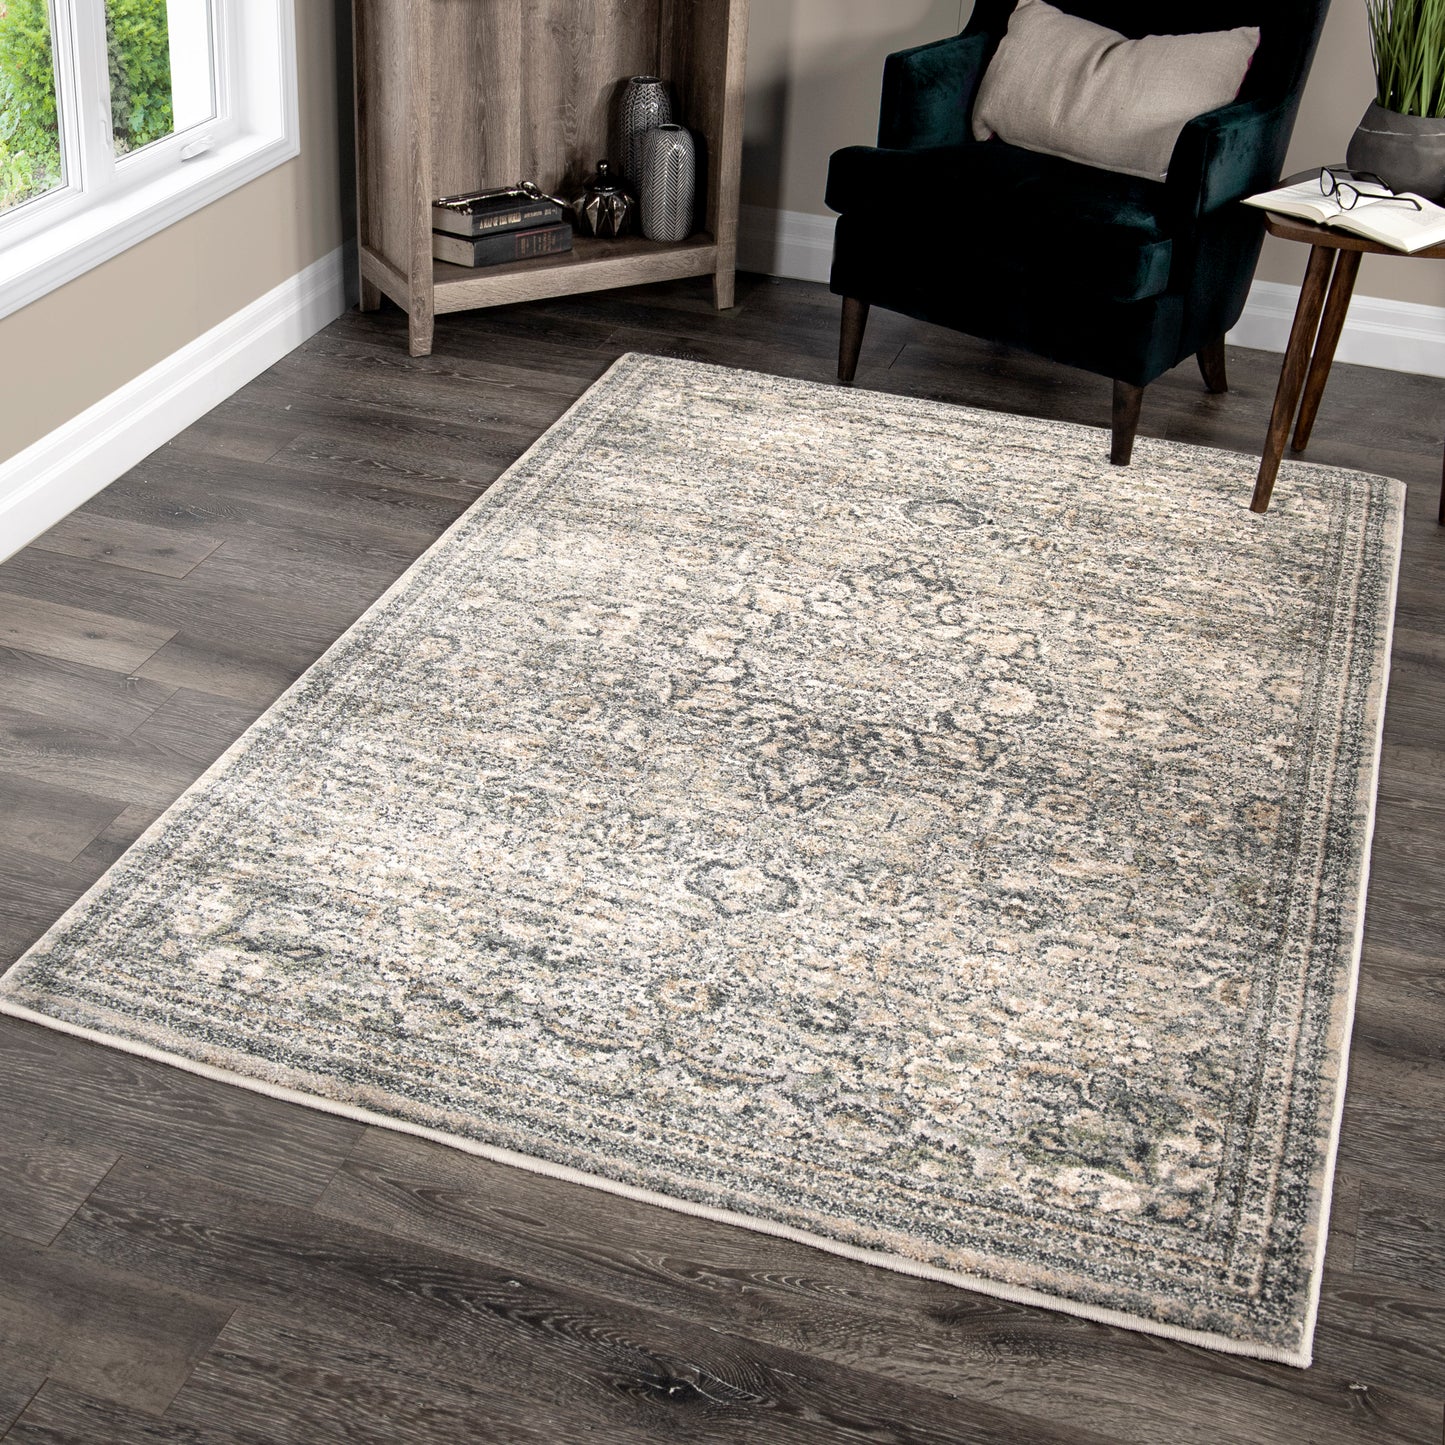 Riverstone Pembroke Synthetic Blend Indoor Area Rug by Orian Rugs